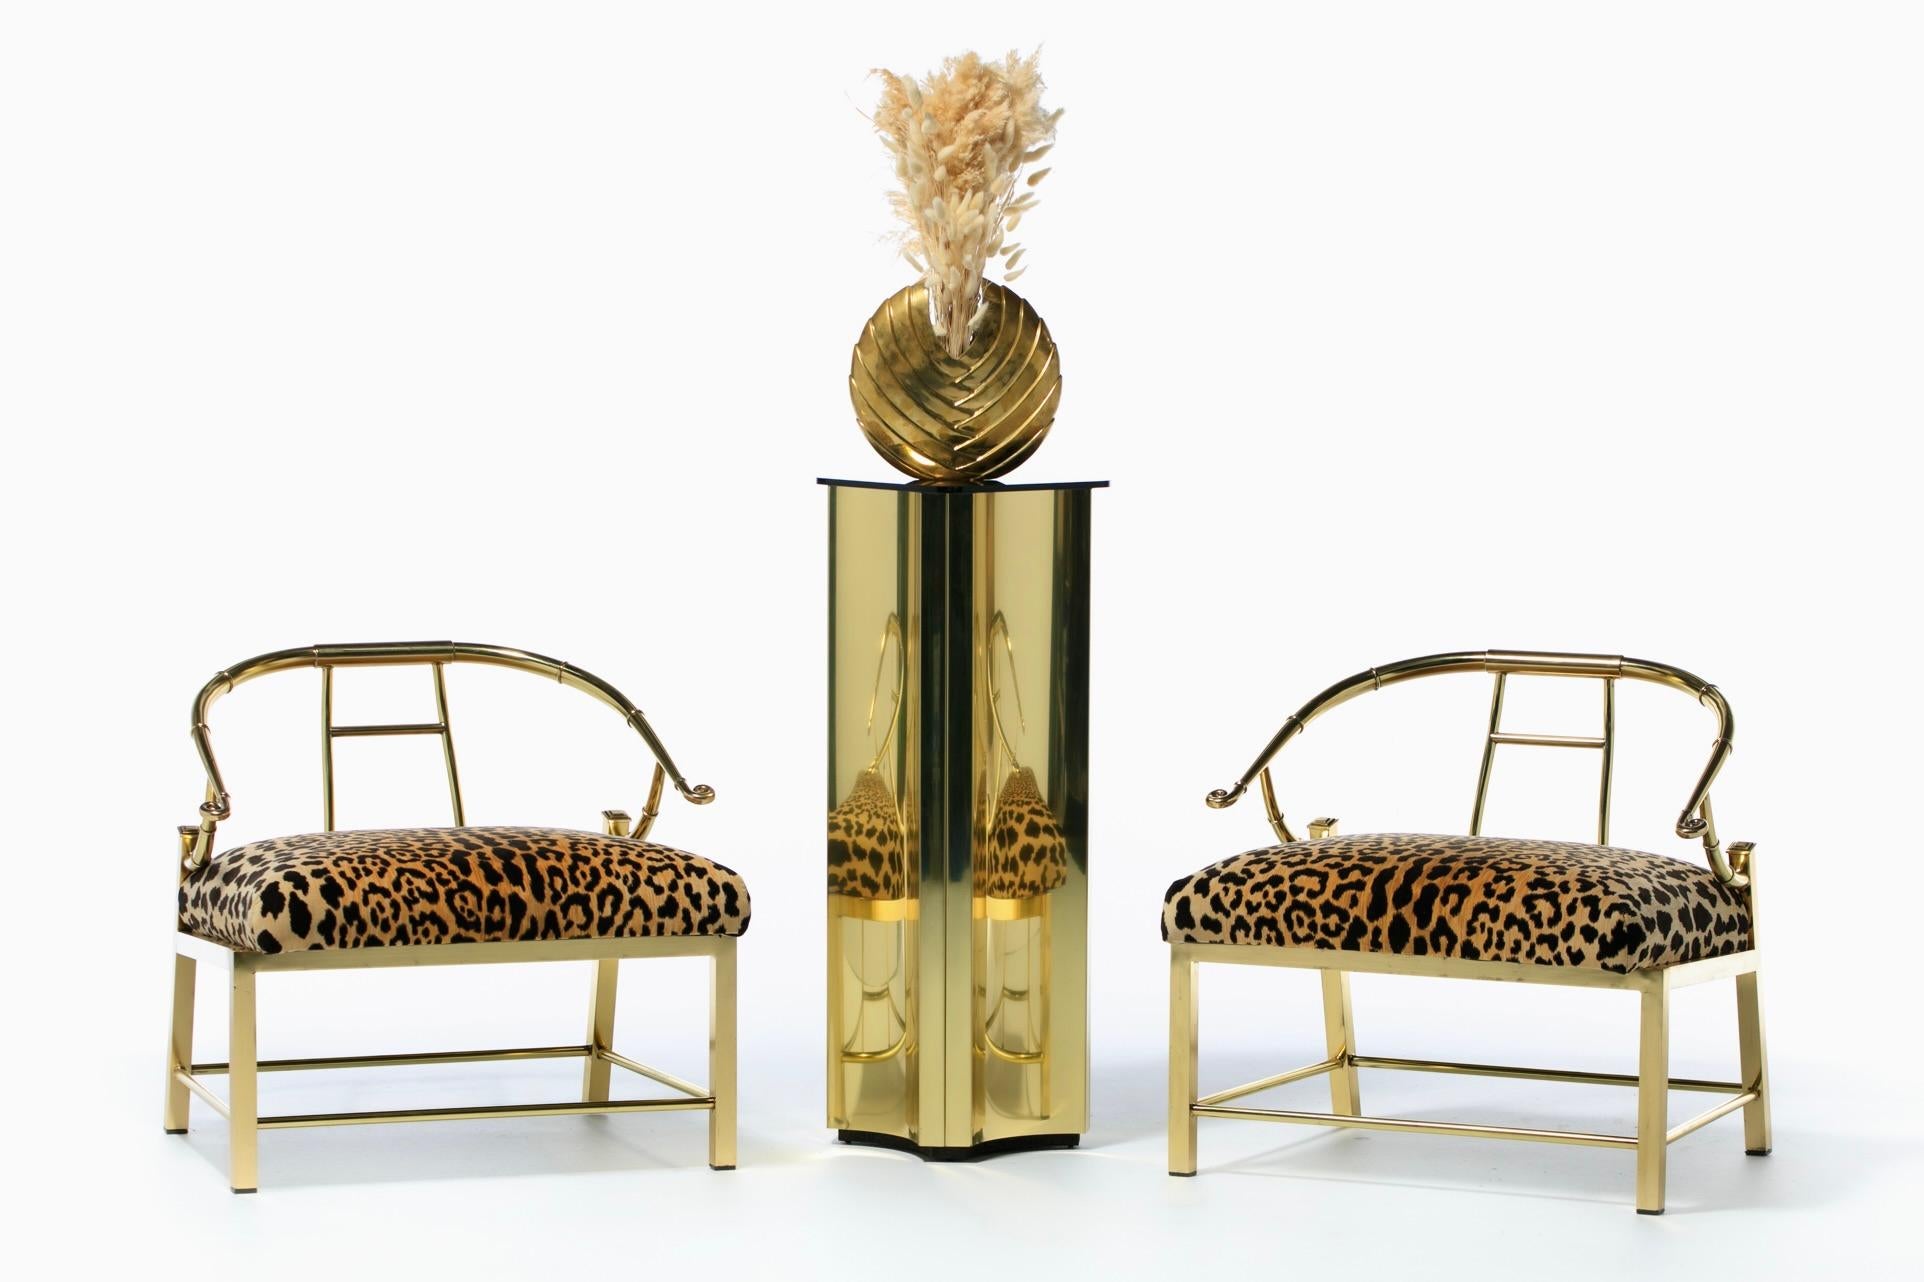 Incredibly stylish and fully restored pair of 1960s Hollywood Regency style brass chairs by Mastercraft. Elegance factor to the max and working that room with confidence. Sexy leopard velvet covers a large wide seat cushion. The cushion's extended